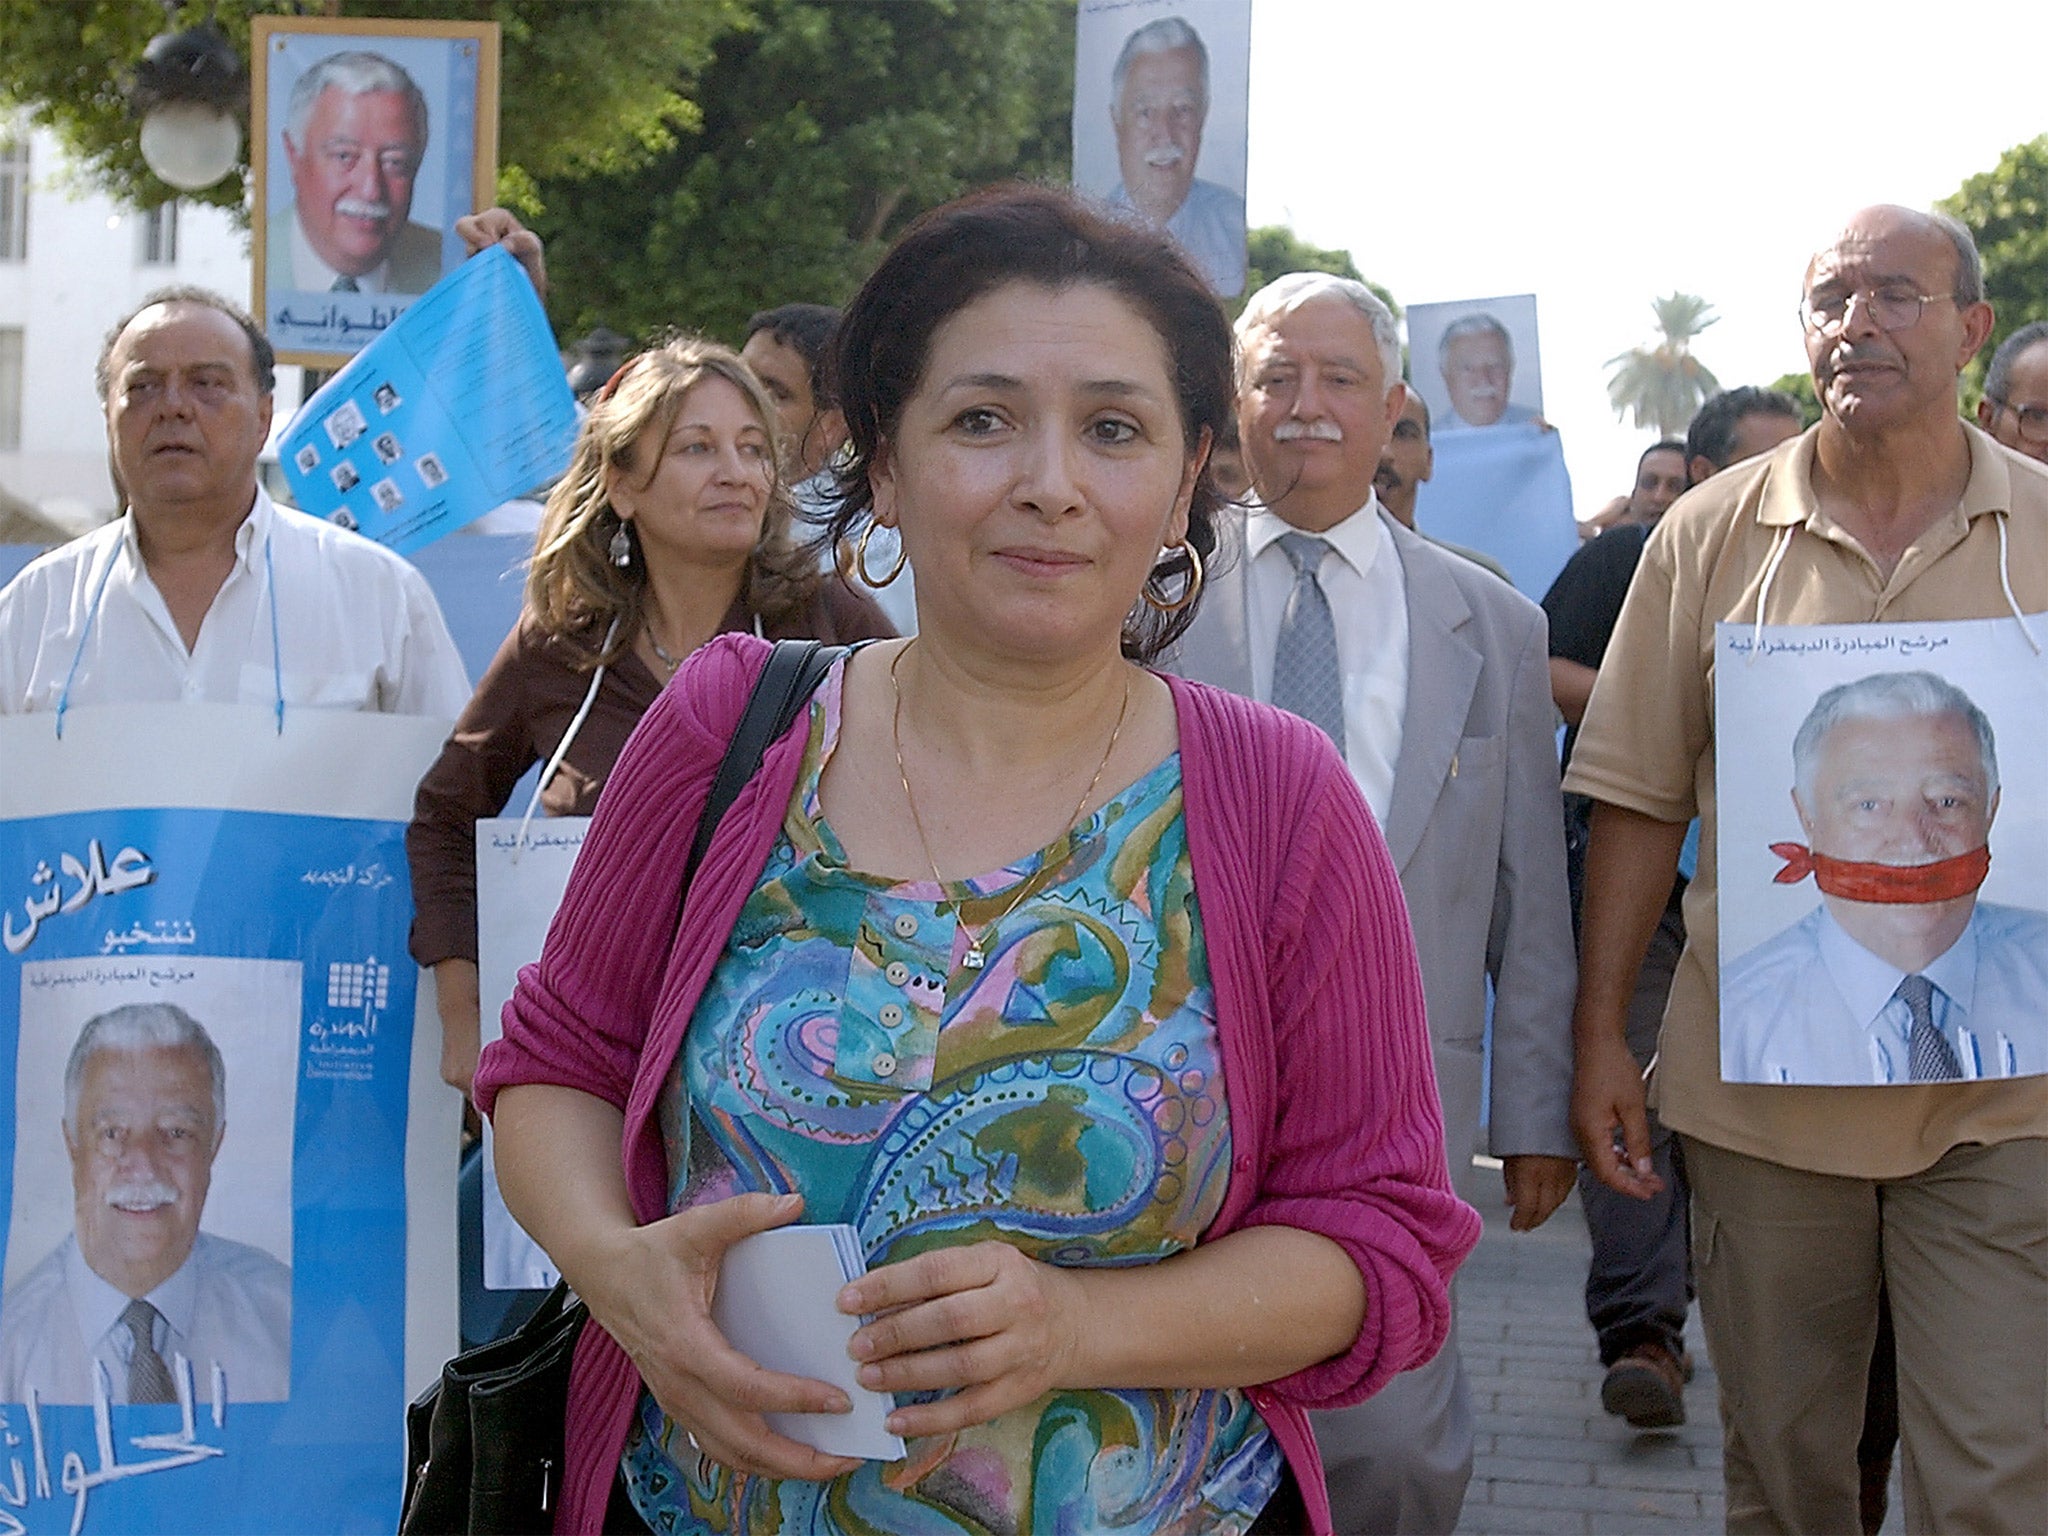 The human-rights activist Sihem Bensedrine and supporters of the electoral candidate Mohamed Ali Halouani protest against the former Tunisian President Zine Ben Ali in 2004